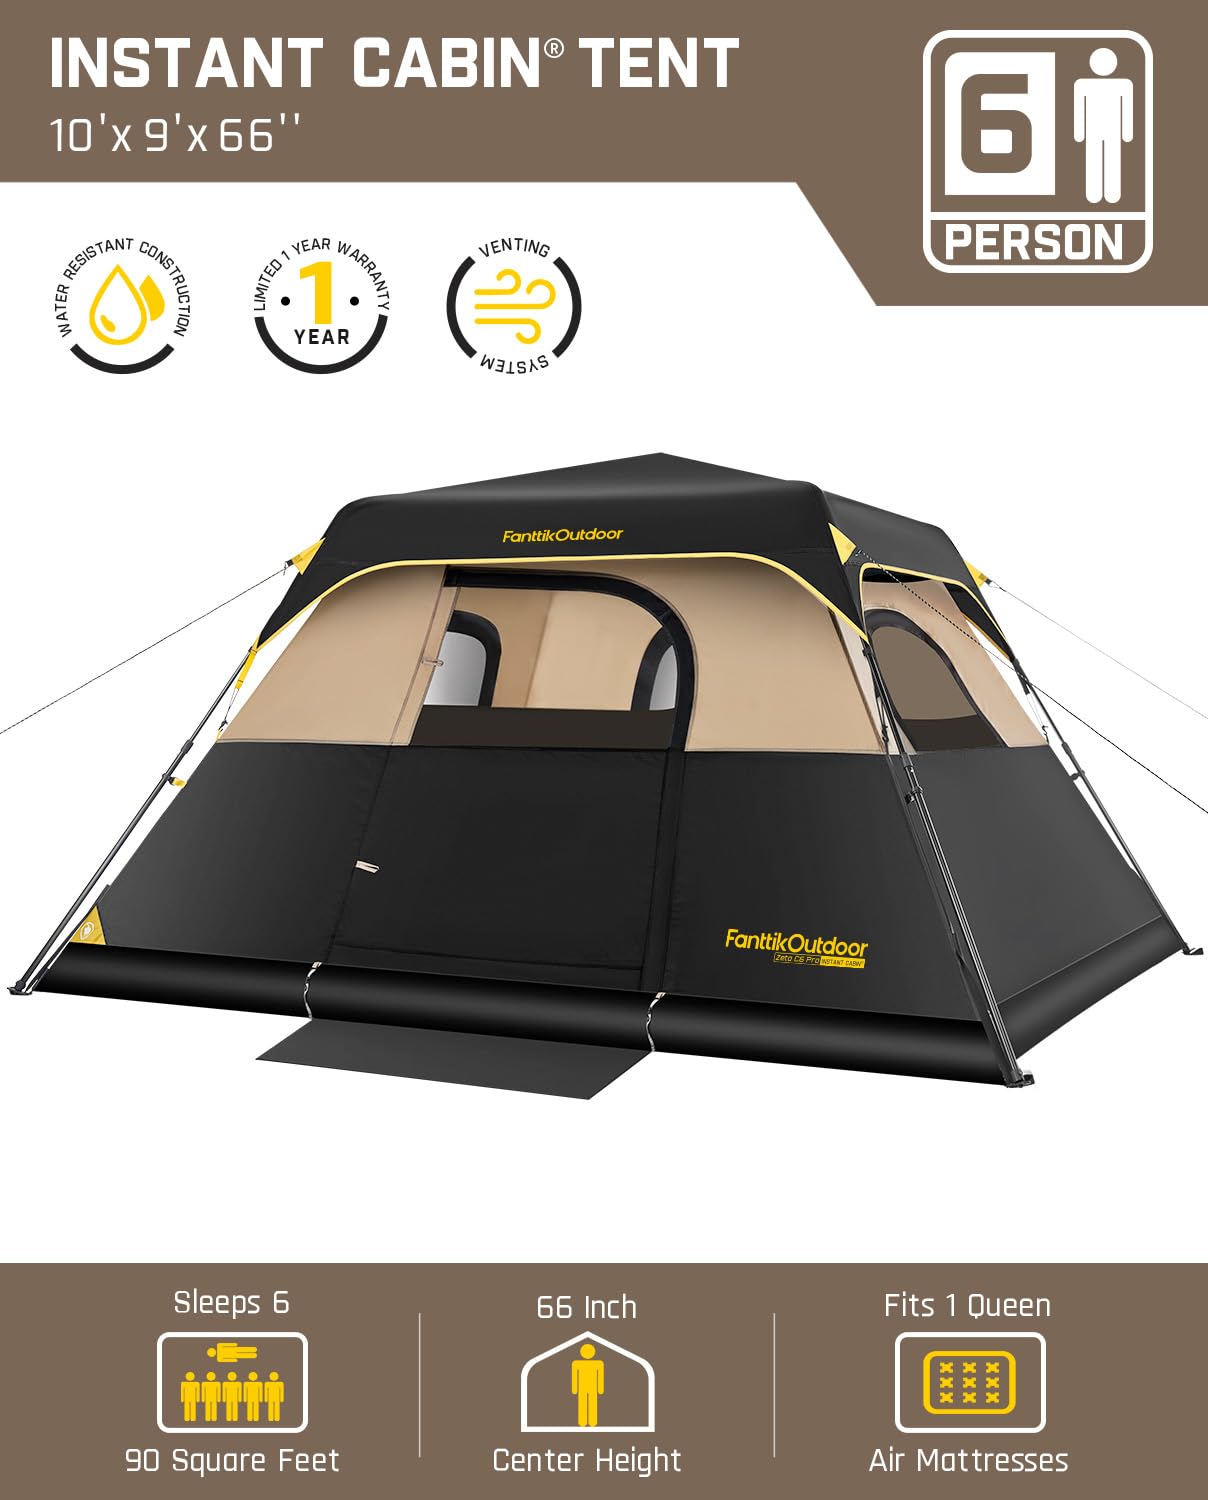 FanttikOutdoor Zeta C6 Pro Camping Tent 6 Person Instant Cabin Tent Setup in 60 Seconds with Rainfly & Windproof Portable Tent with Carry Bag for Family Camping & Hiking, Upgraded Ventilation